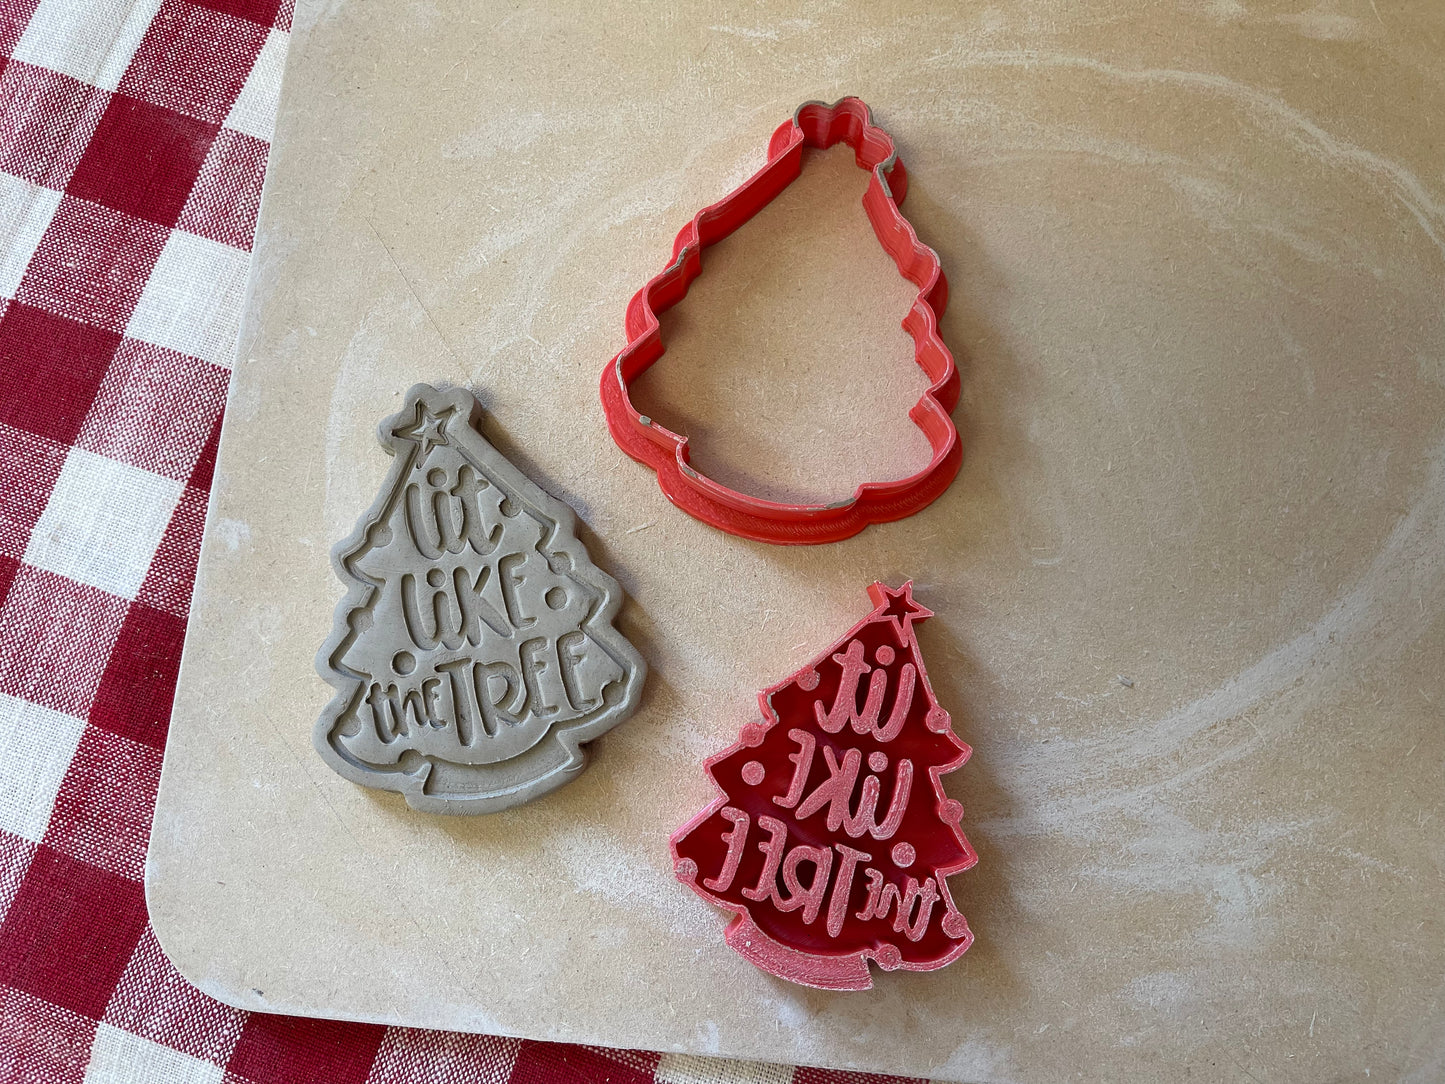 "Lit like the Tree" or plain Christmas tree pottery stamp w/ optional ornament cutter - Pottery Tool, plastic 3d printed, multiple sizes available